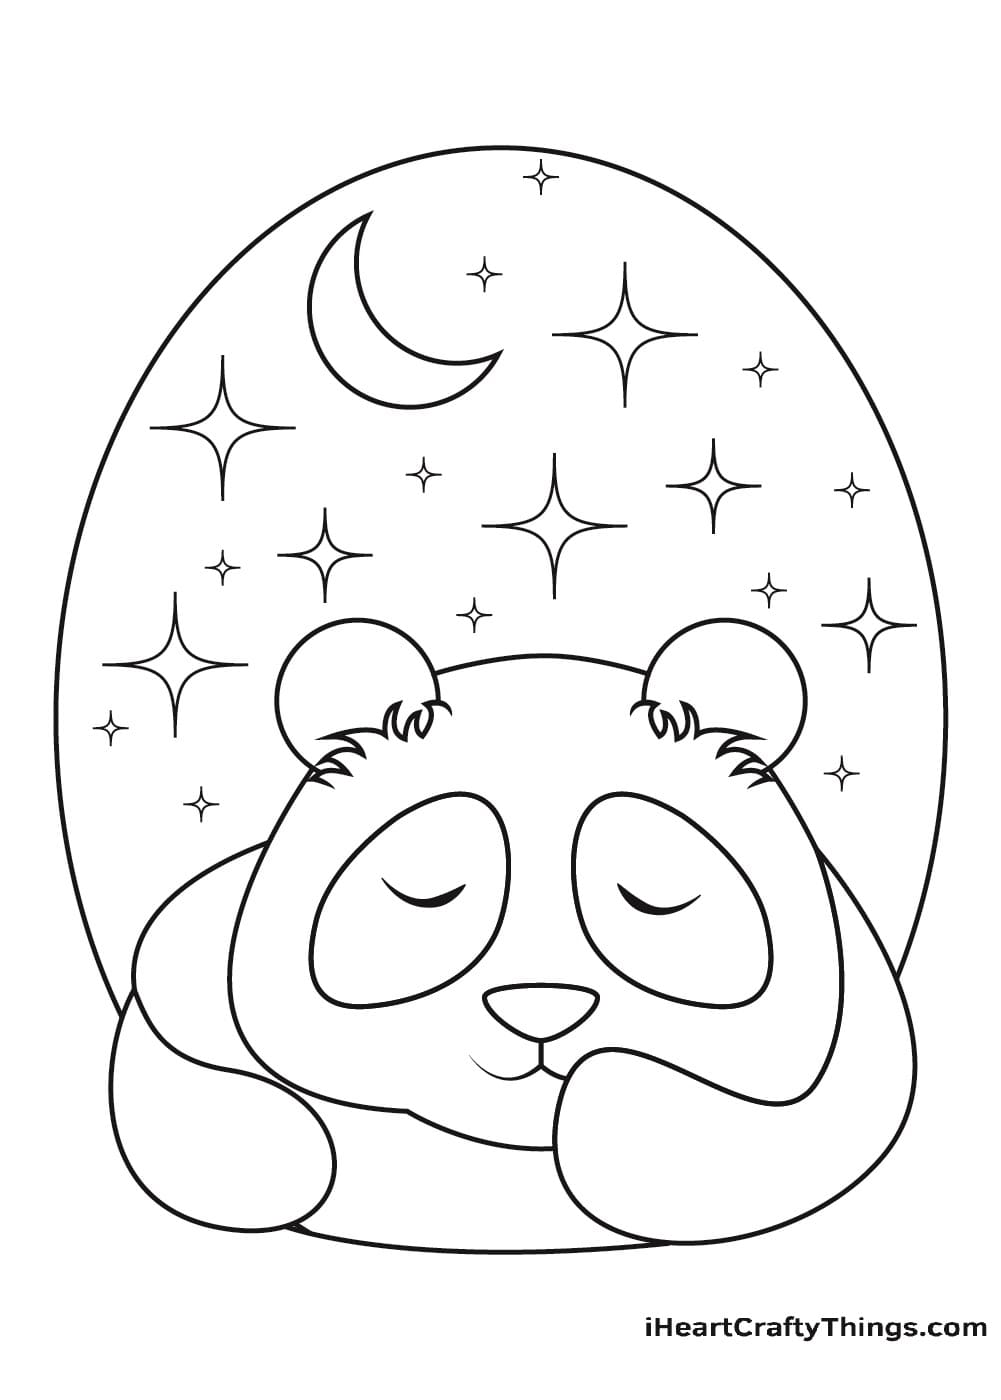 Giant Panda Cute For Kids Coloring Page